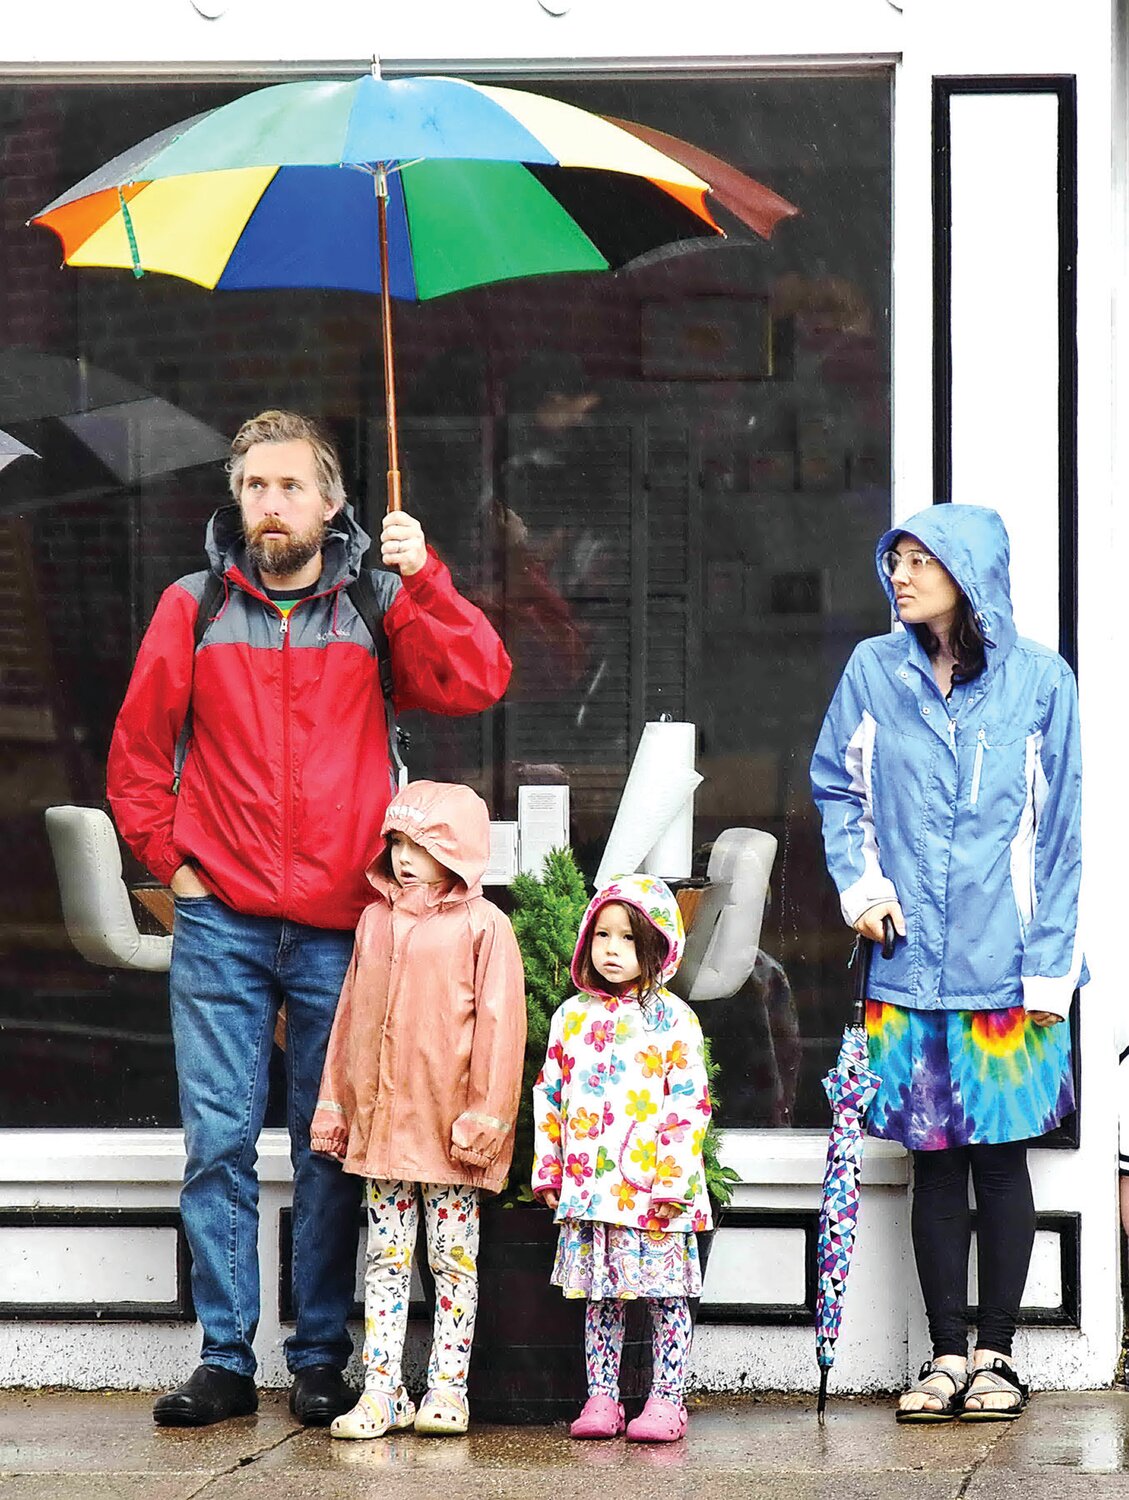 A family braves the rain to attend the PrideFest Parade.